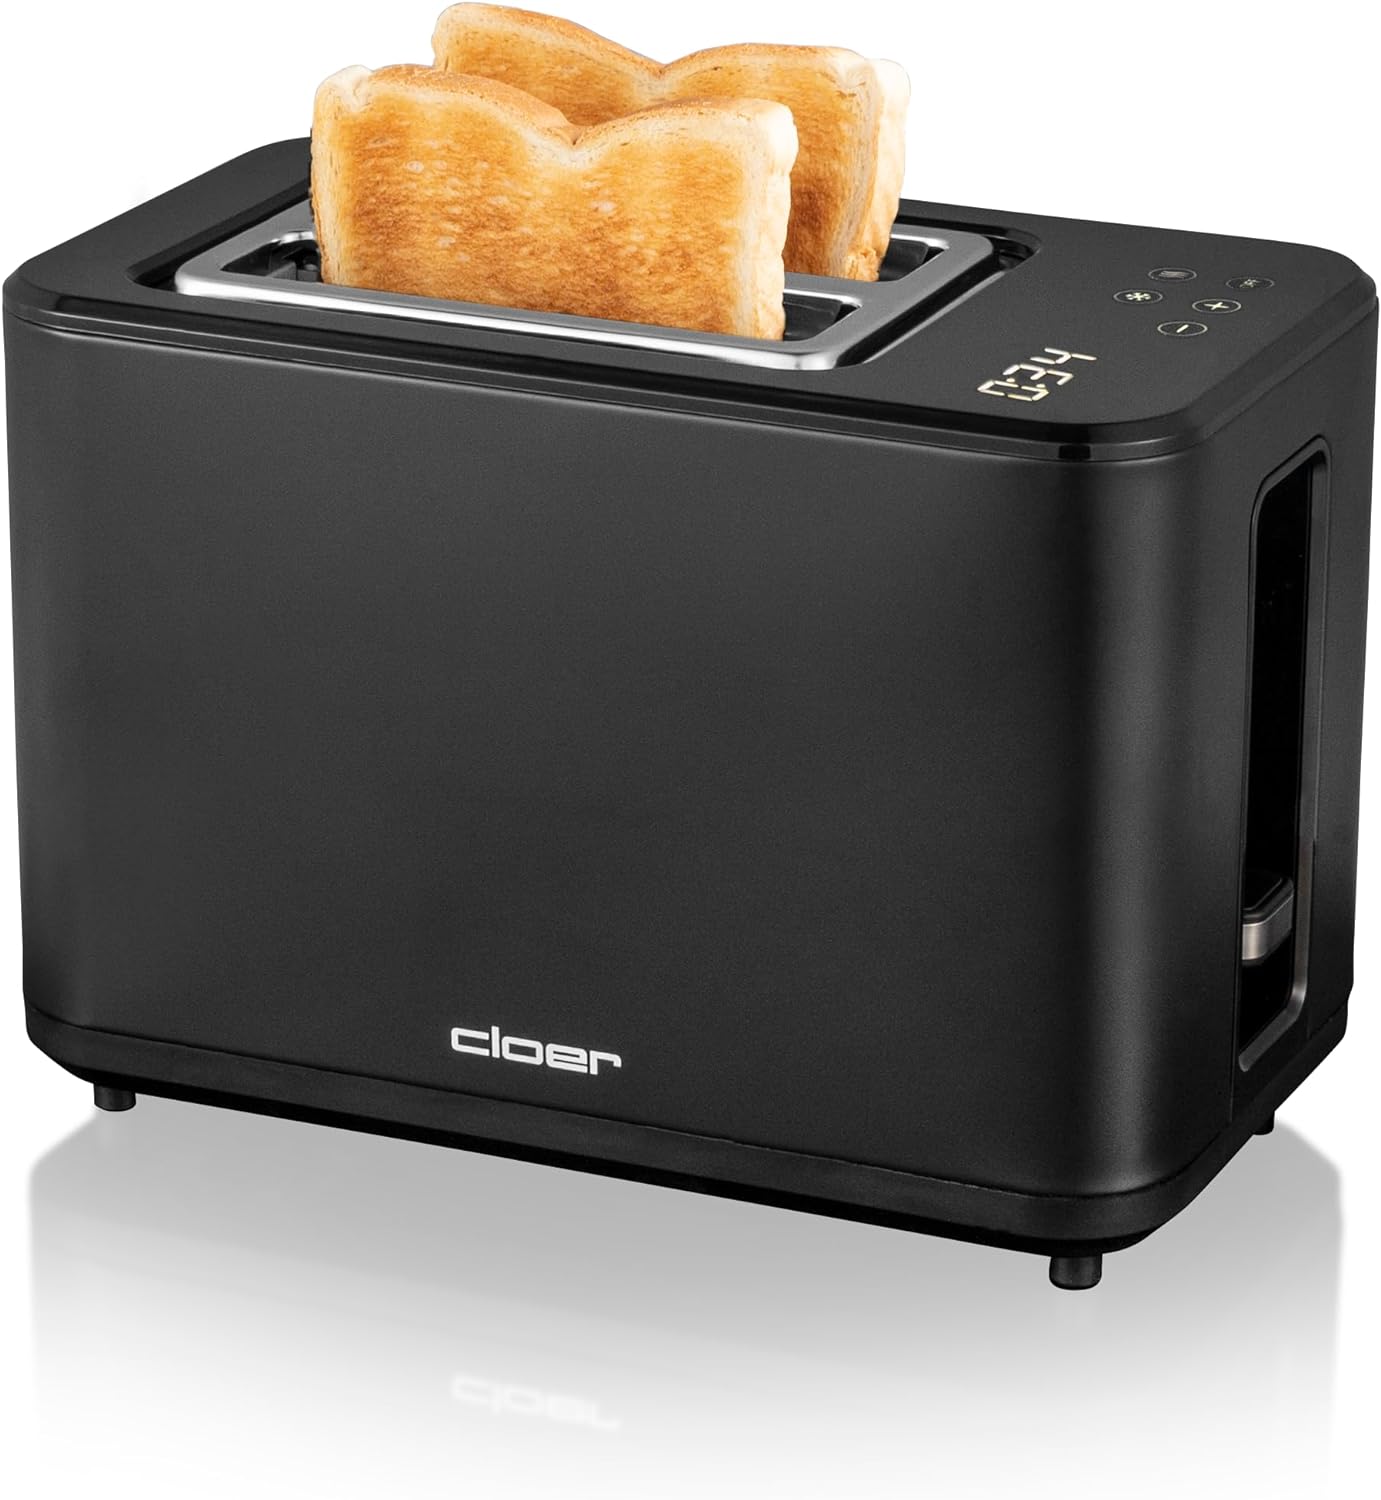 Cloer 3930 Digital Toaster for 2 Slices, Touch Function, 750-900 W, Remaining Time Display, Defrost Function, Reheat Function, Bun Attachment, 7 Browning Levels, Crumb Drawer, Black